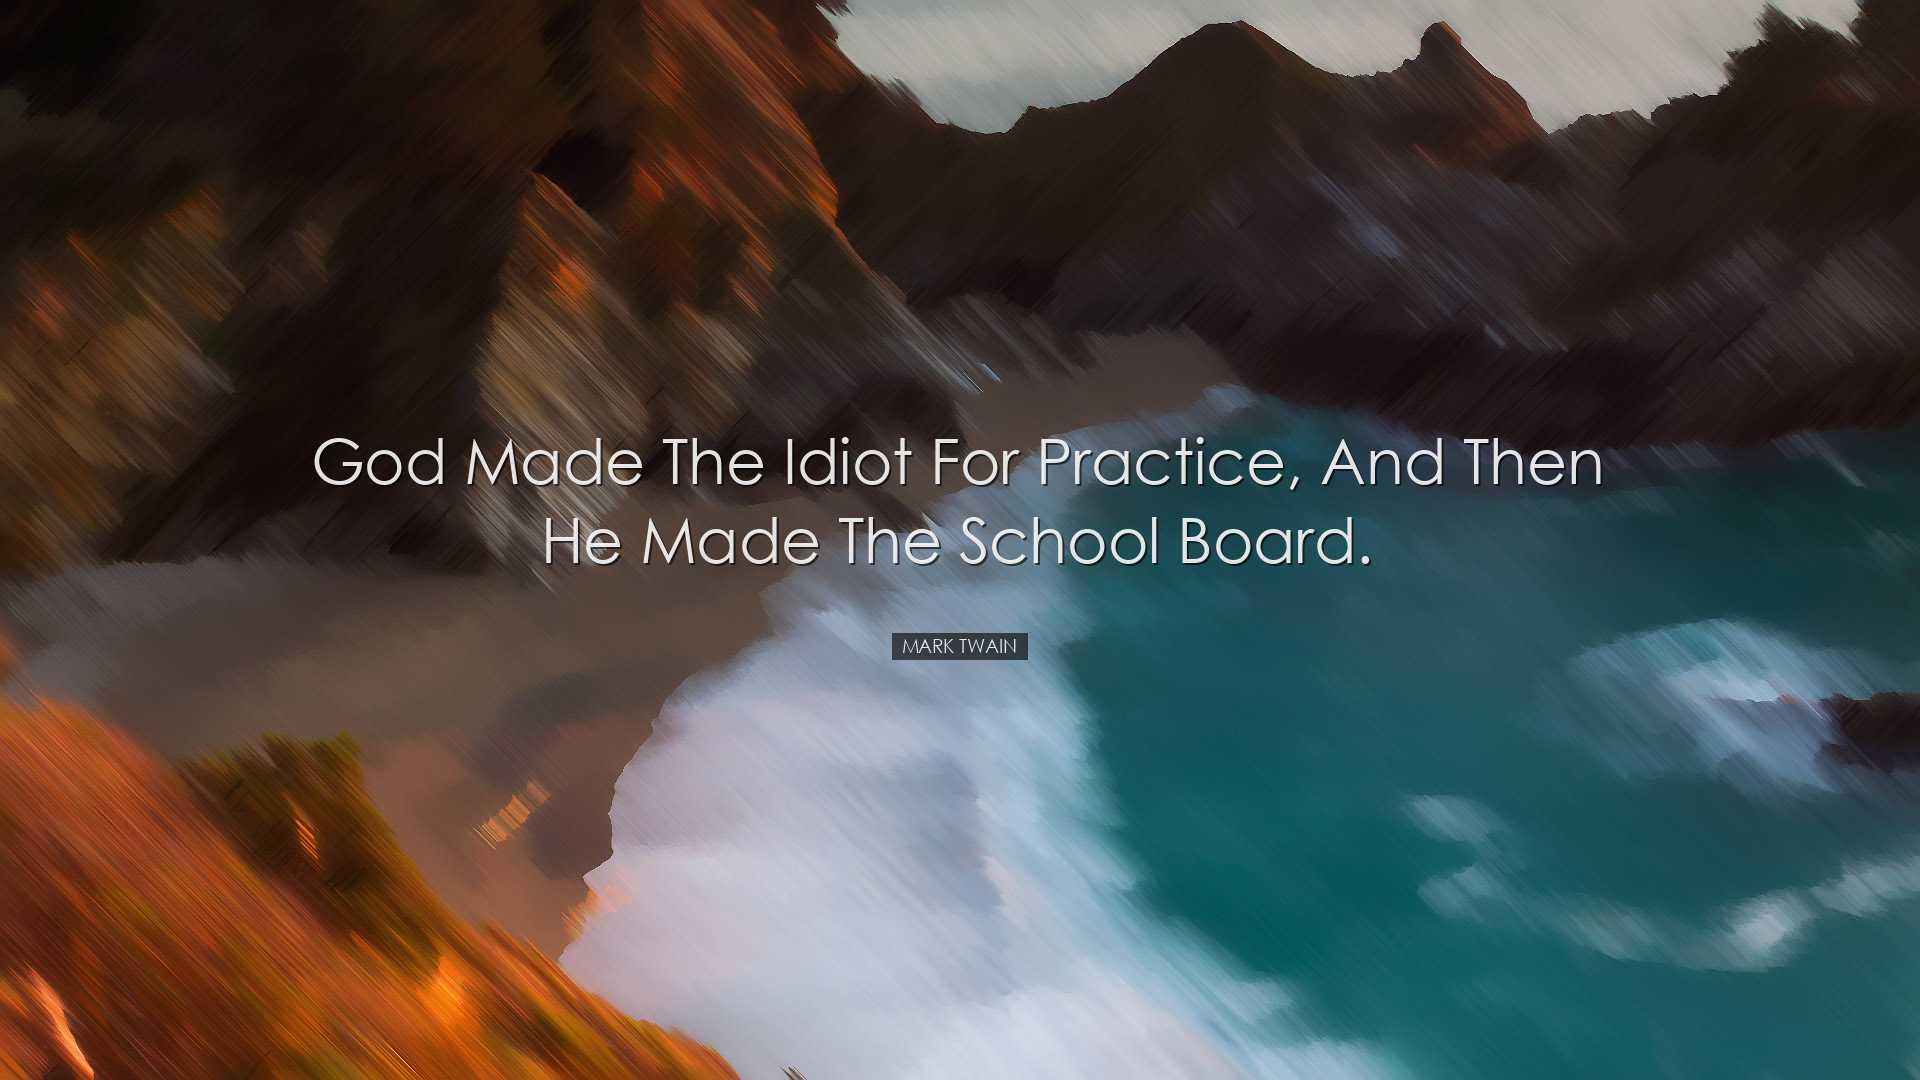 God made the Idiot for practice, and then He made the School Board